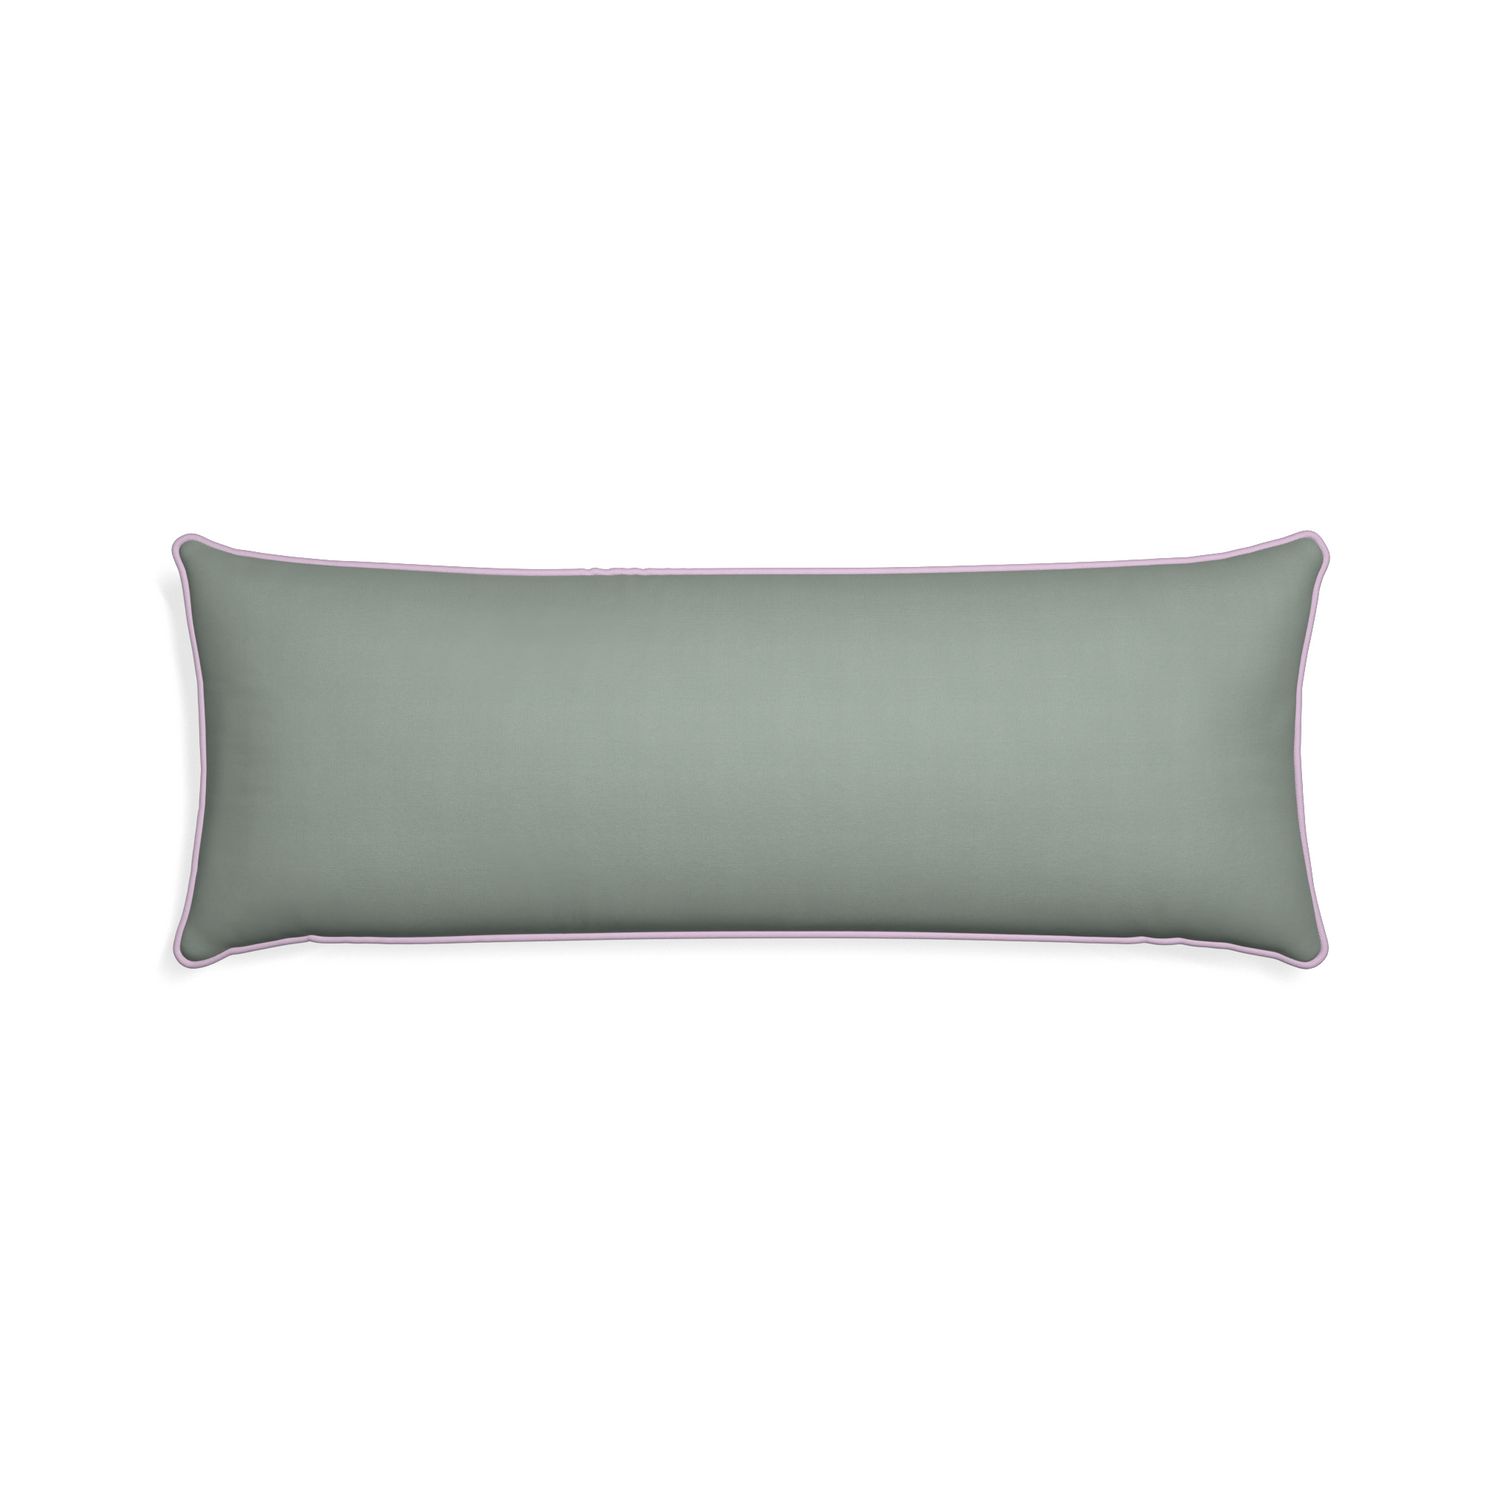 Xl-lumbar sage custom pillow with l piping on white background